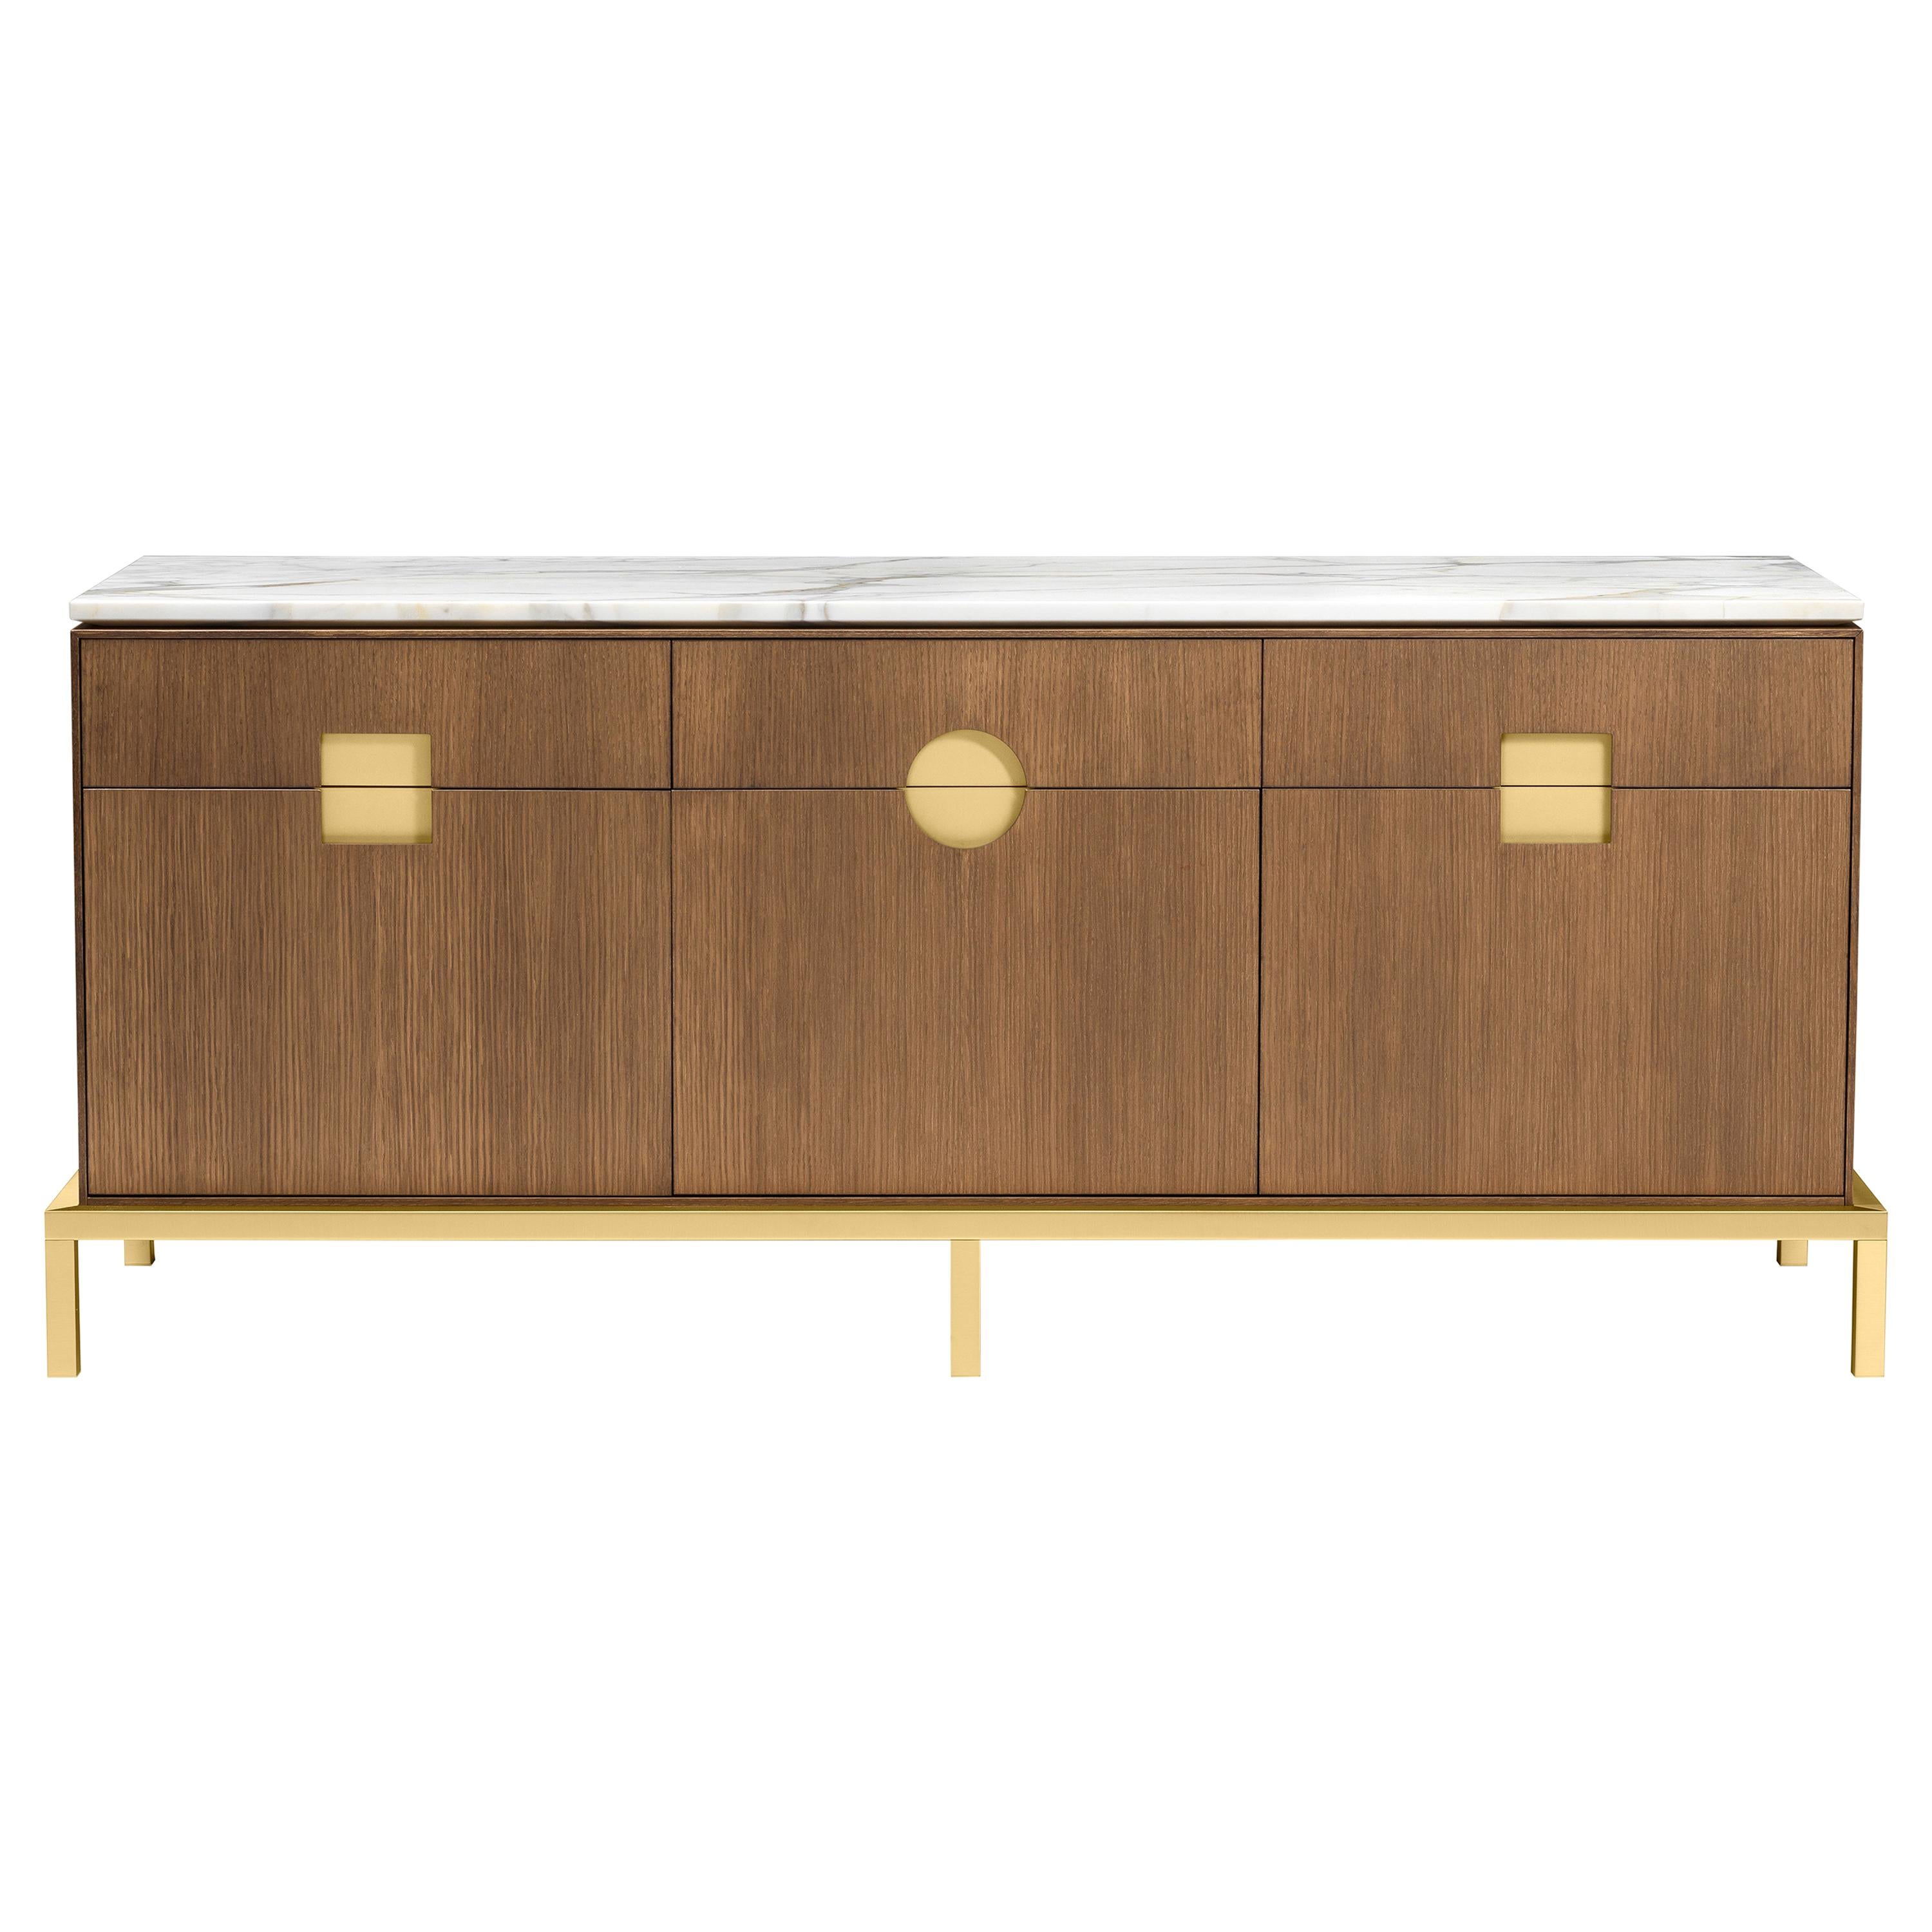 Zuan Dining Cabinet with Satin Brass Legs & Calacatta Marble by Paolo Rizzatto